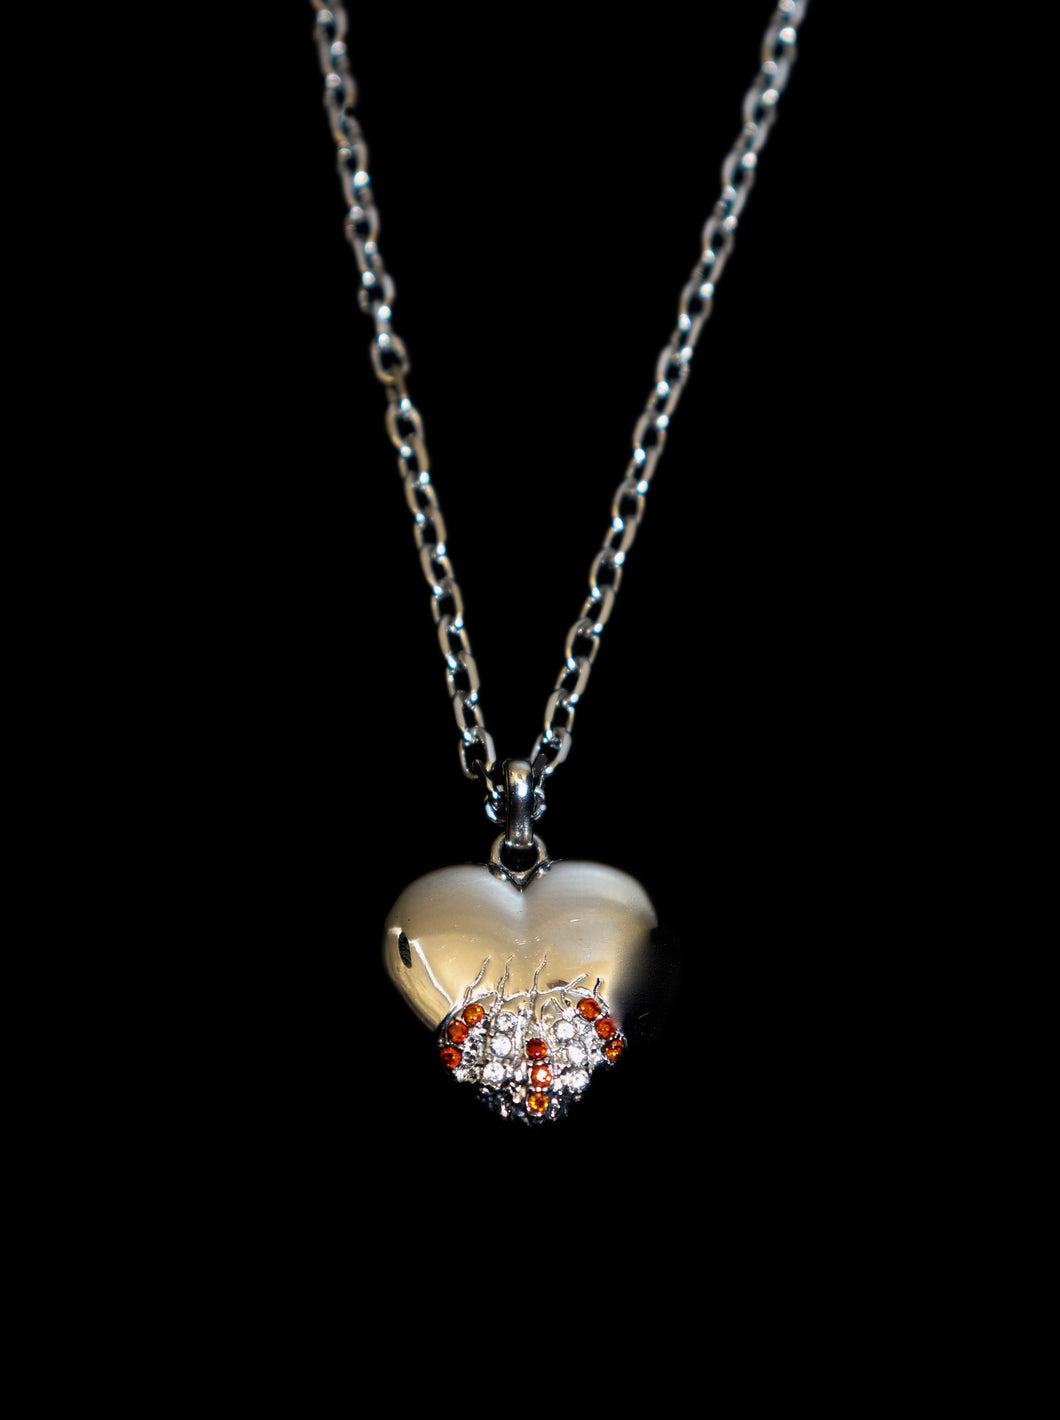 Shattered Love Necklace - Fashion Jewelry by Yordy.